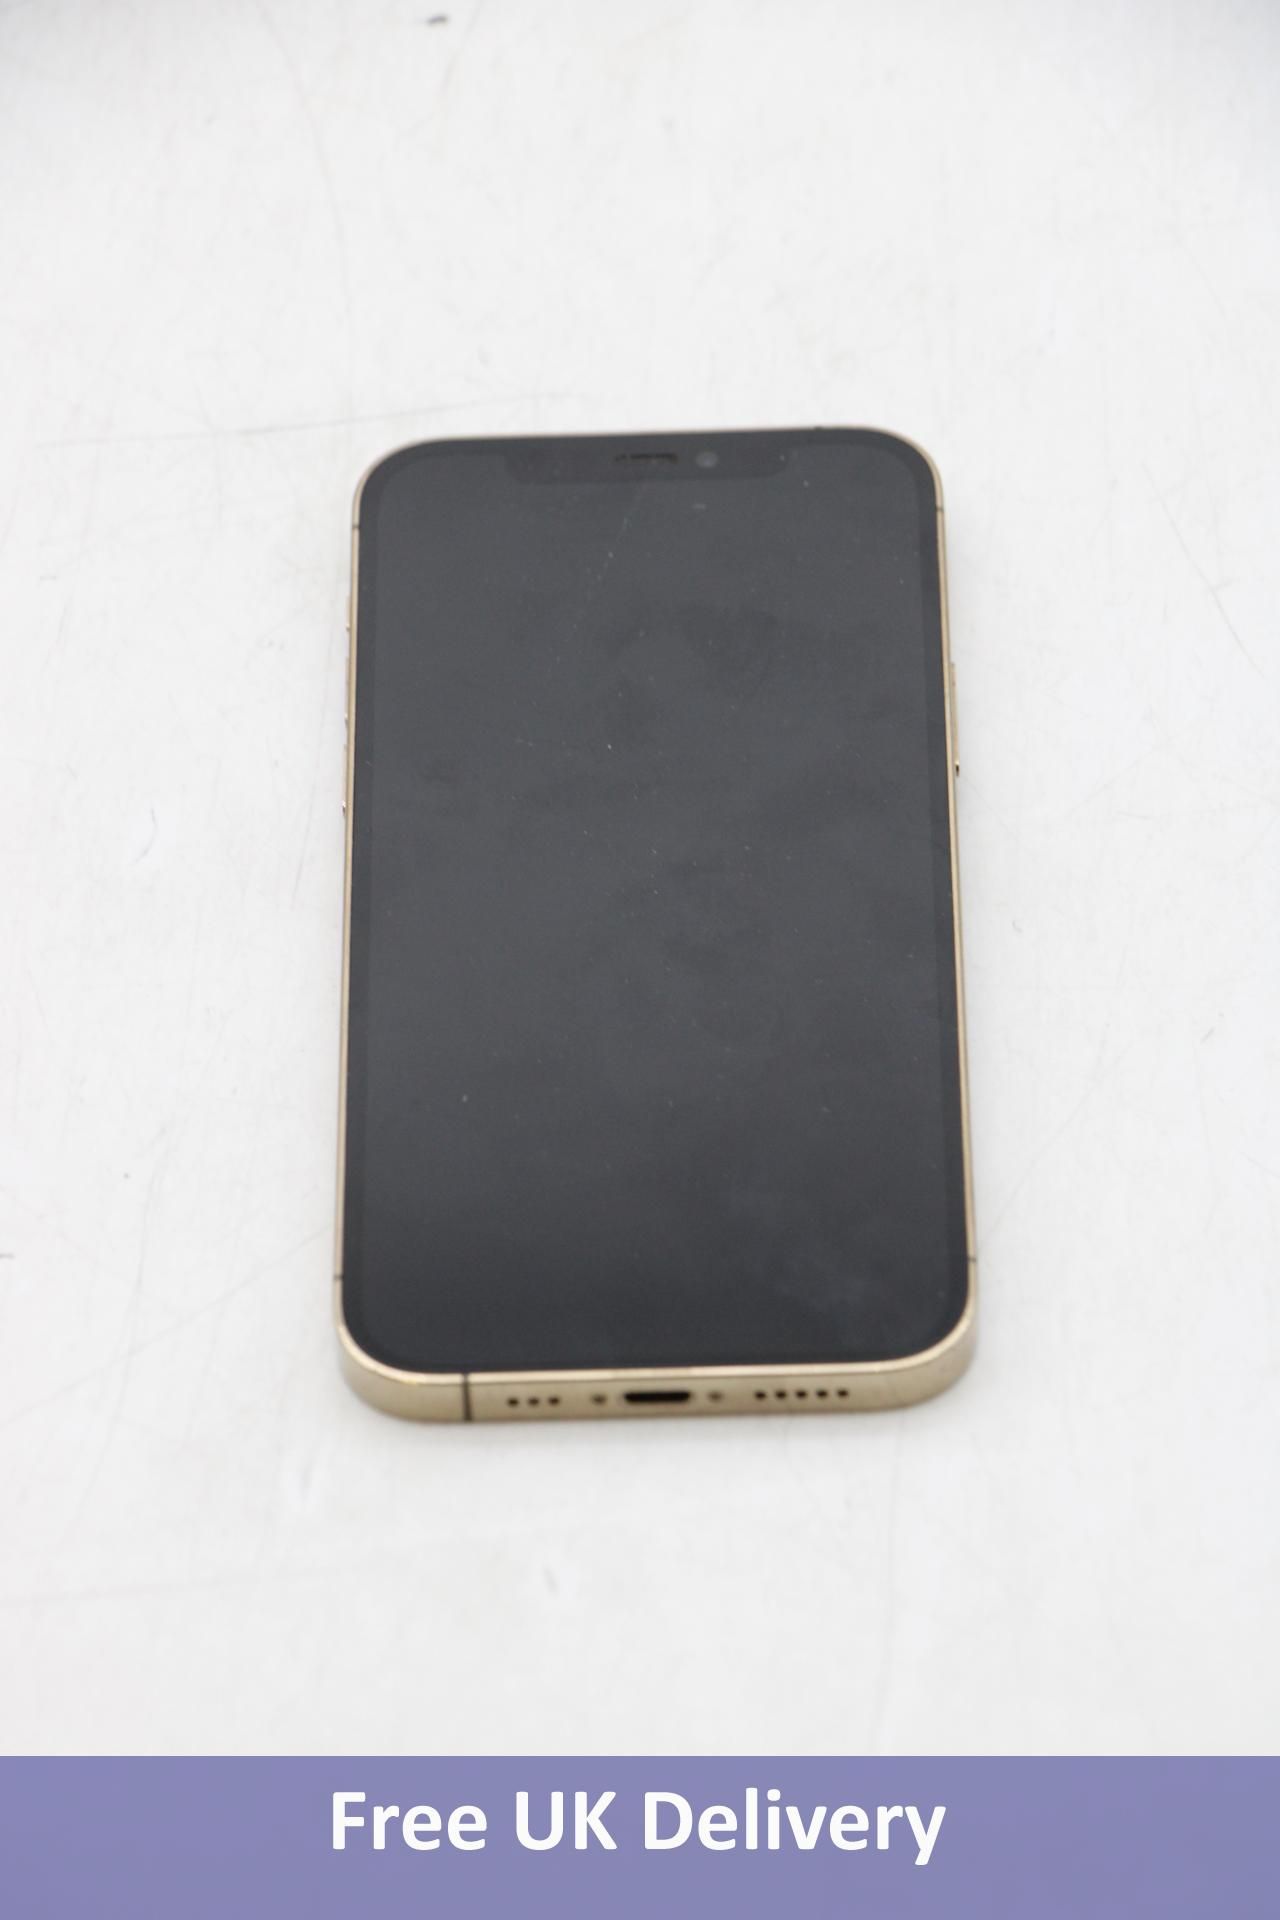 Apple iPhone 12 Pro, 128GB, Gold. Used, no box or accessories. Checkmend clear, Ref. CM19886859-7FF1